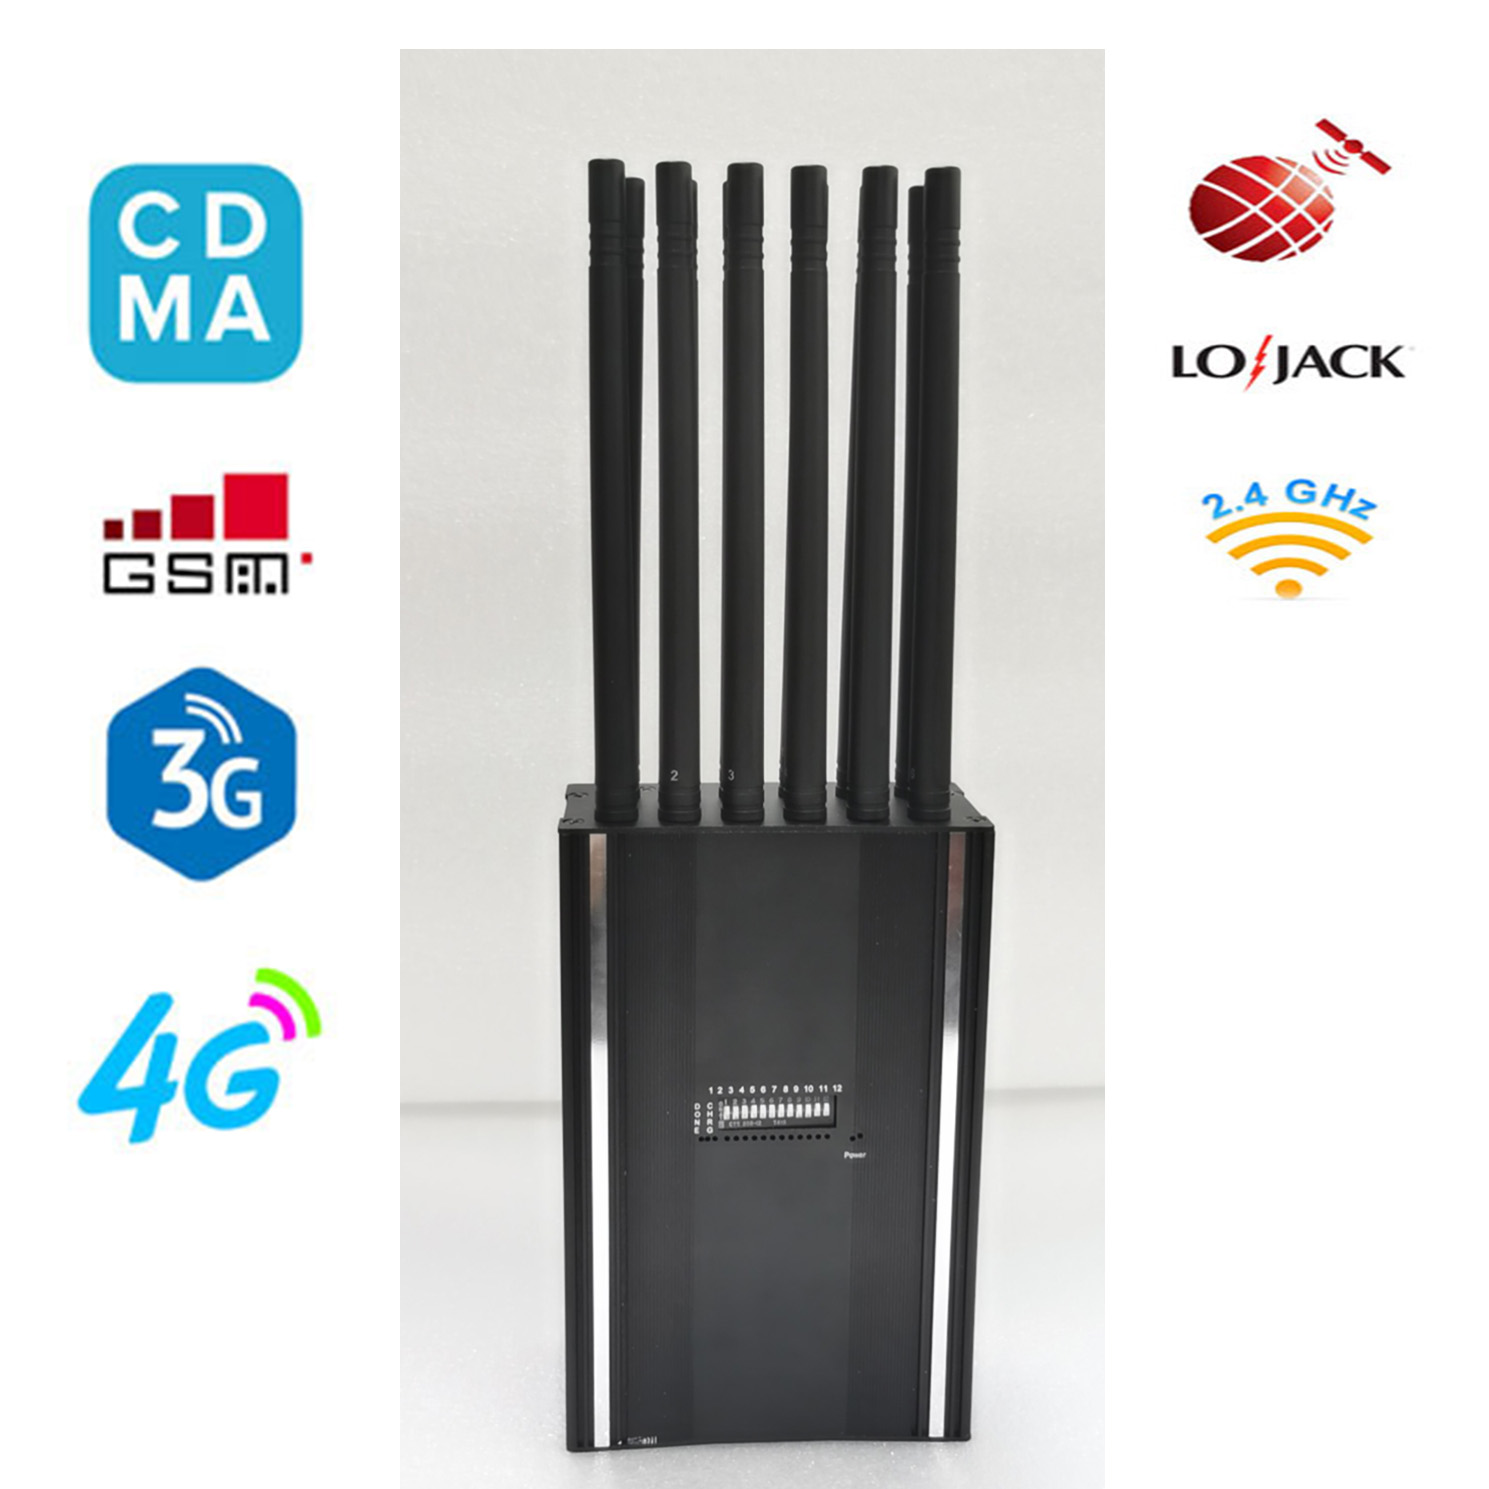 mobile phone signal jammer